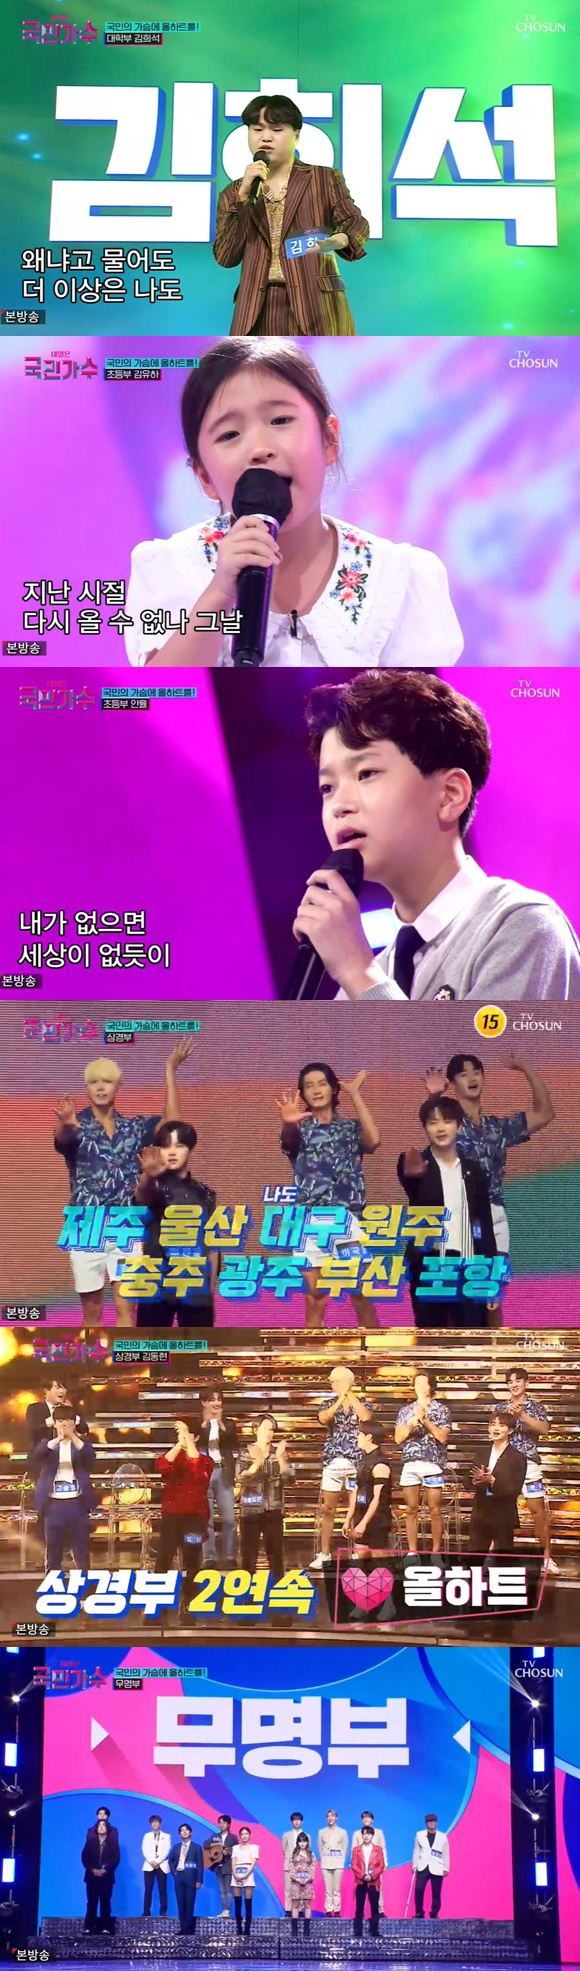 On the afternoon of the 7th, First broadcast broadcast TV Chosun entertainment program Tomorrow is National singer, the stage of university, elementary school, upper and lower grades, and unknowns were released.Kim Yuha, the first to appear on the elementary team on this day, was surprised by everyone.Kim Yuha, who sang Lee Sun-hees A Old Year, showed cuteness with his unique hand-knuckle gesture and rhythm, and surprised everyone with his one-sided singing ability.Kim Yuha received All Hearts and Yoon Myung-sun The Master praised the praise, including clapping and clapping.Kim Yuha asked, When is the old time for Yuha? It is the old days when I used to go to Kids cafe without a mask.Park Seon-ju, The Master, wrote, I wanted to explain.The rhythm of Oh, old days expressed by Yuha is that I explain the song. It was better when I went to Kids Cafe in the old days than I thought I should sing.On YouTube, the famous star, An Yul-gun, received a heart except for Baek Ji-young.Lee Chan One said, Ryul is a very good friend of trots. I brought a song from Jung Soo Ra today, but it seems to be singing along with Jung Soo Ras voice.I do not want to take the song to my own color. Lee Seok Hoon said, I want to hear the other genres of Anguil County quickly. Baek Ji-young, who did not press heart, said, I have to tell the rate that I always receive.The vibration is good and everything is good, but it is better than too much. You should practice subtracting emotions. The judges One Baek Ji-young and Lee Bum-soo praised Its attractive. Is this a attraction? Yoon Myung-sun, The Master, said, The mask is handsome, but it has excellent musical ability.I would like you to show a little more of the Gyeongsang man in the next stage. One Jang Young-ran, who watched the stage of Kim Dong-Hyun next, said, I have a lot of audition pros, and I am grateful for coming to our TV Chosun National Song.I feel like looking for pearls. Lee Seok Hoon praised his delicate singing skills, saying, It is my favorite voice style. Park Sun-joo said, It seems like I met a participant who makes a sound properly for a long time. Kim Dong-Hyun also played non-Yuha for American singer Sam Smith.Finally, the list featured unknown singers to announce their names; the first cast member, Kim Doha, caught the ears of the judges Ones from the first verse.In particular, Park Sun-ju The Master said, It was so good, he praised Lady Gaga and other vocals.Even after Kim Doha, many unknown singers shone their names and faces to announce their names.